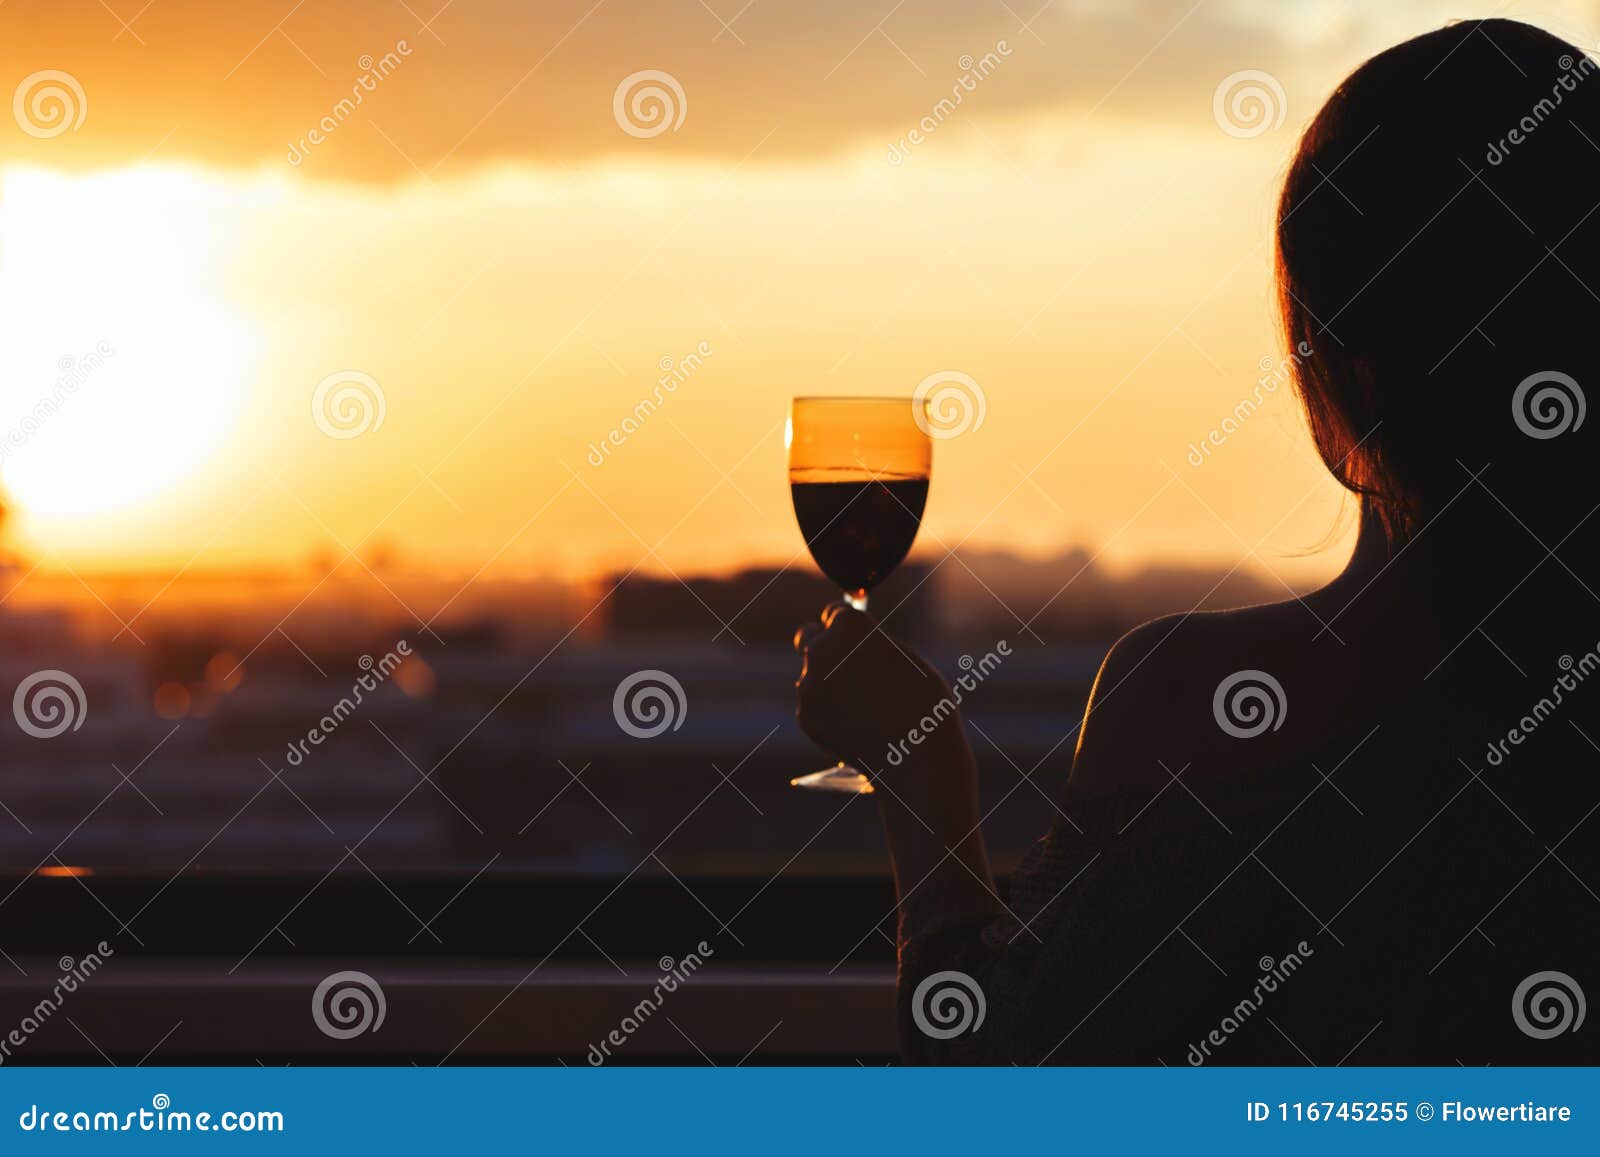 Silhouette of Woman Hand with Glass of Red Wine Stock Image - Image of ...